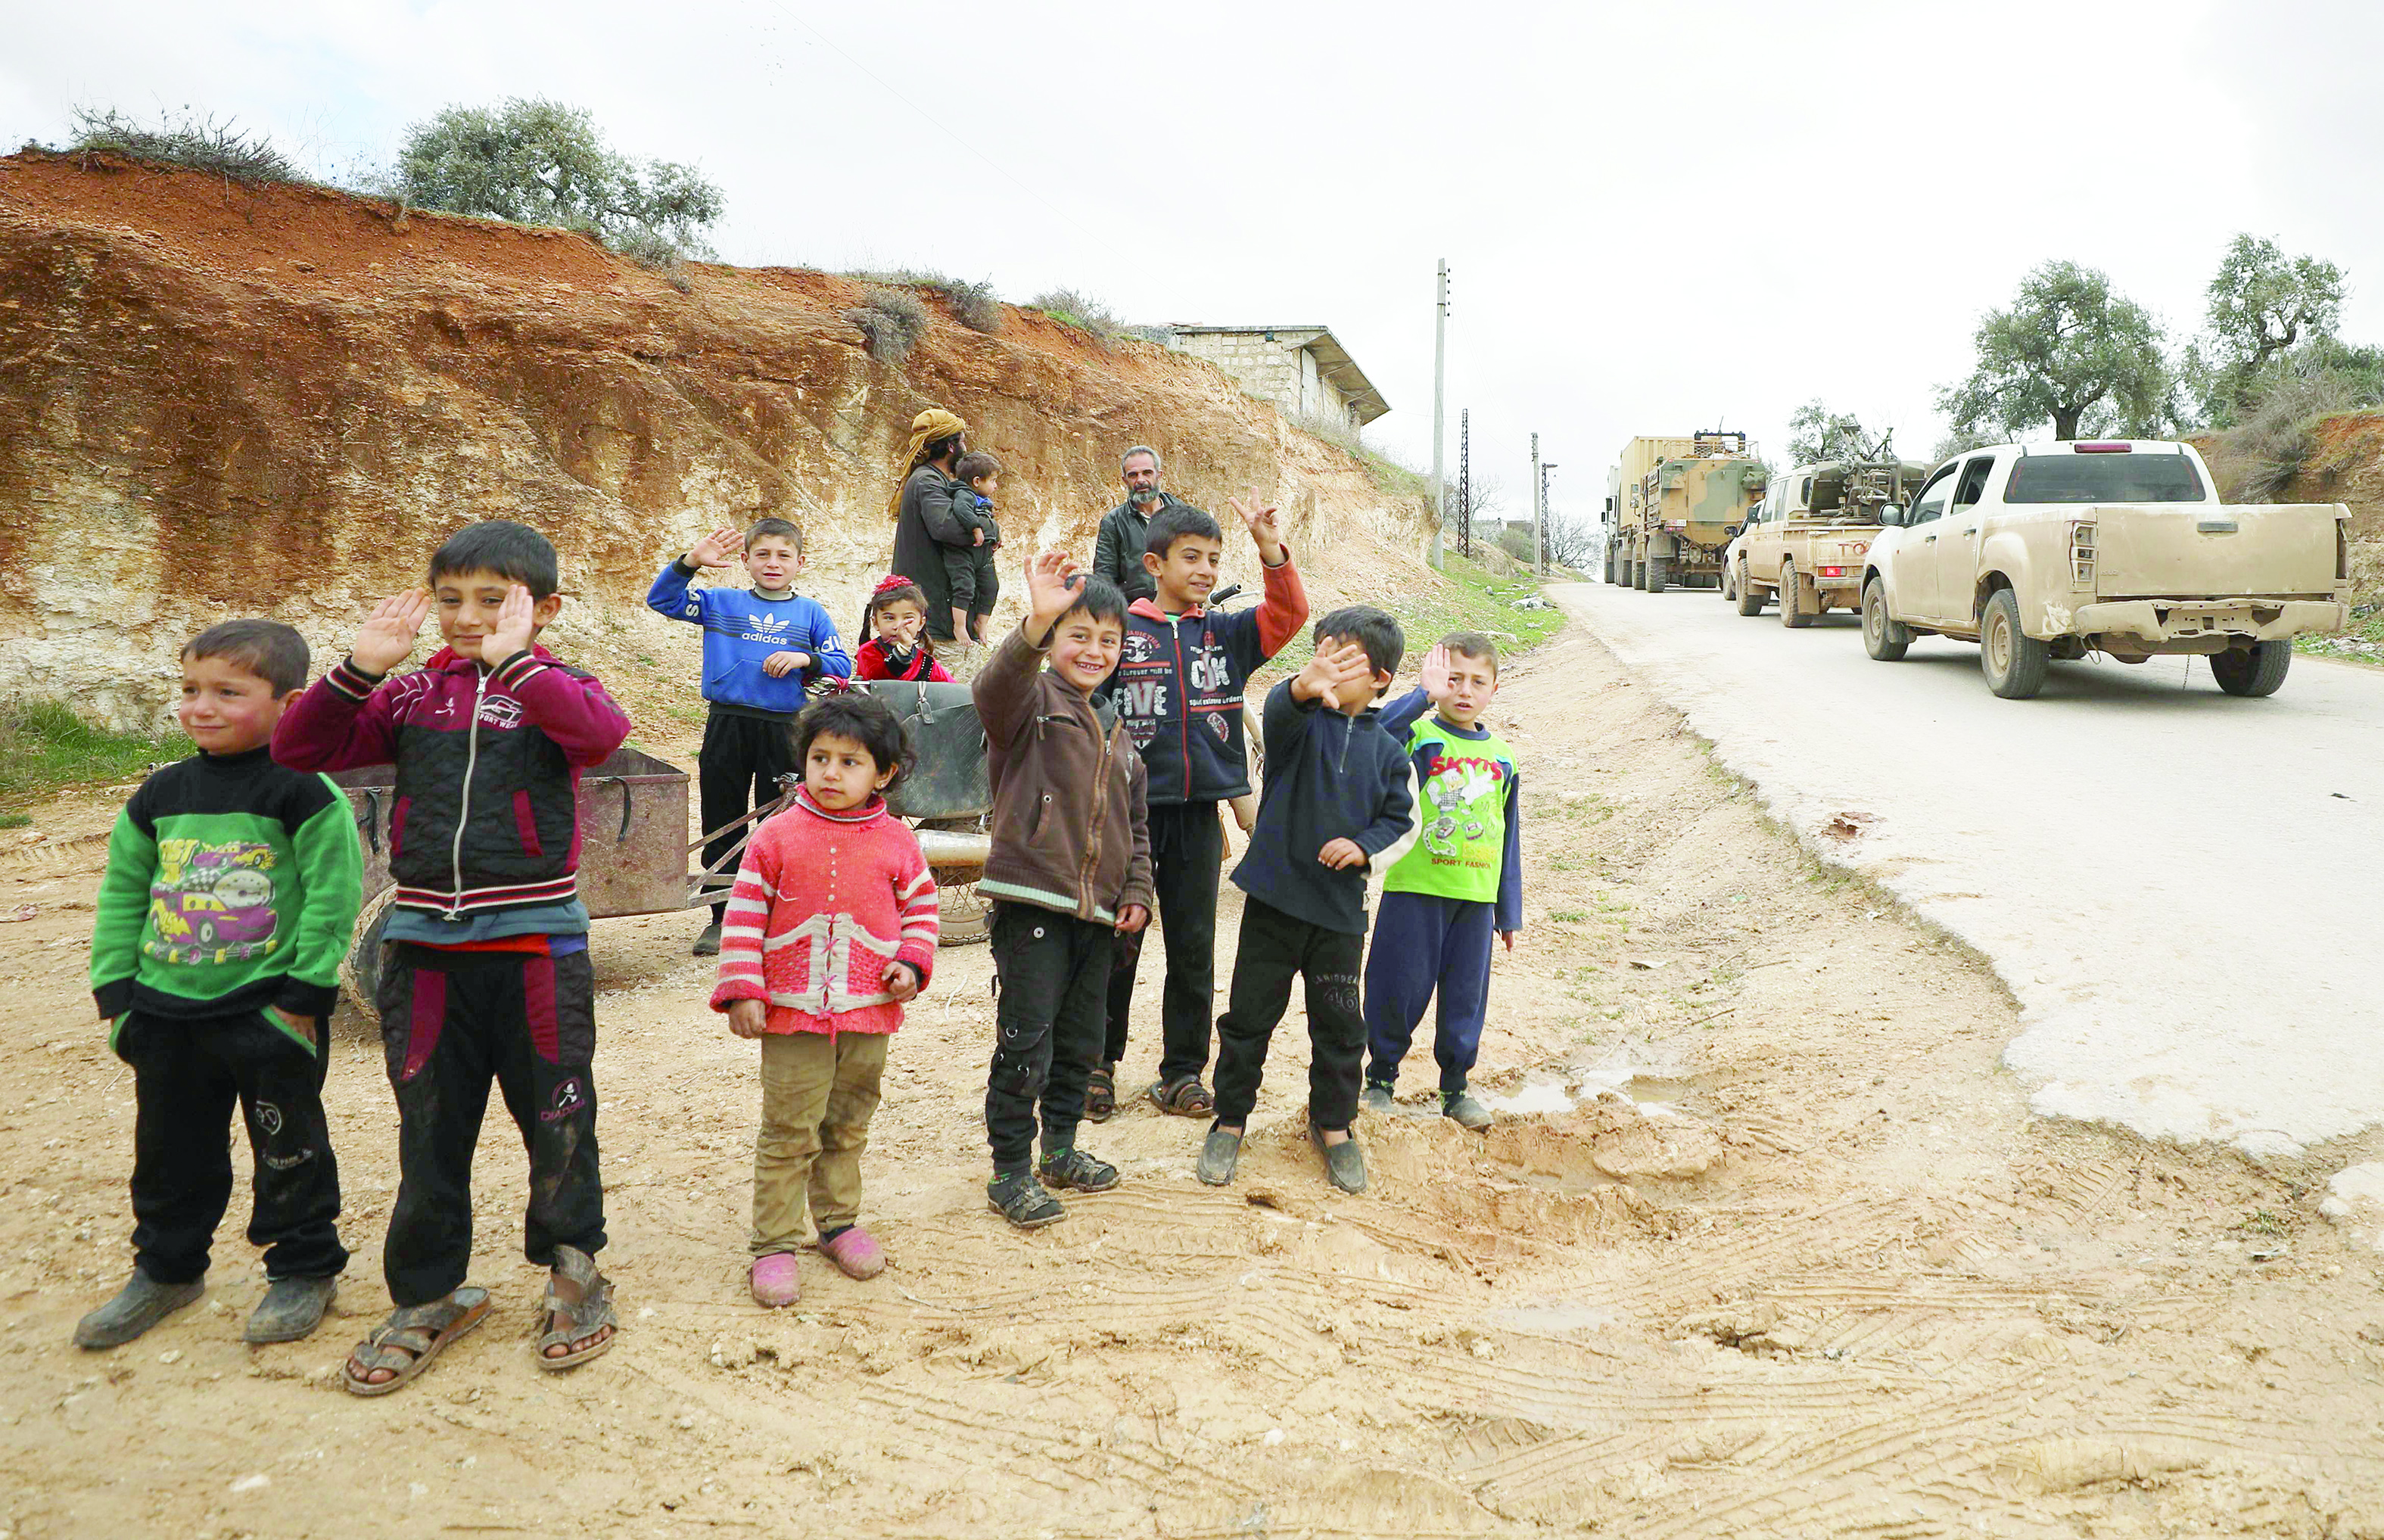 Children watch as a Turkish military convoy that crossed into the Syrian territory via the Kafr Lusin border, passes near Syria's northwestern city of Idlib as it heads toward the south of the Idlib province, on February 22, 2020. (Photo by Omar HAJ KADOUR / AFP)